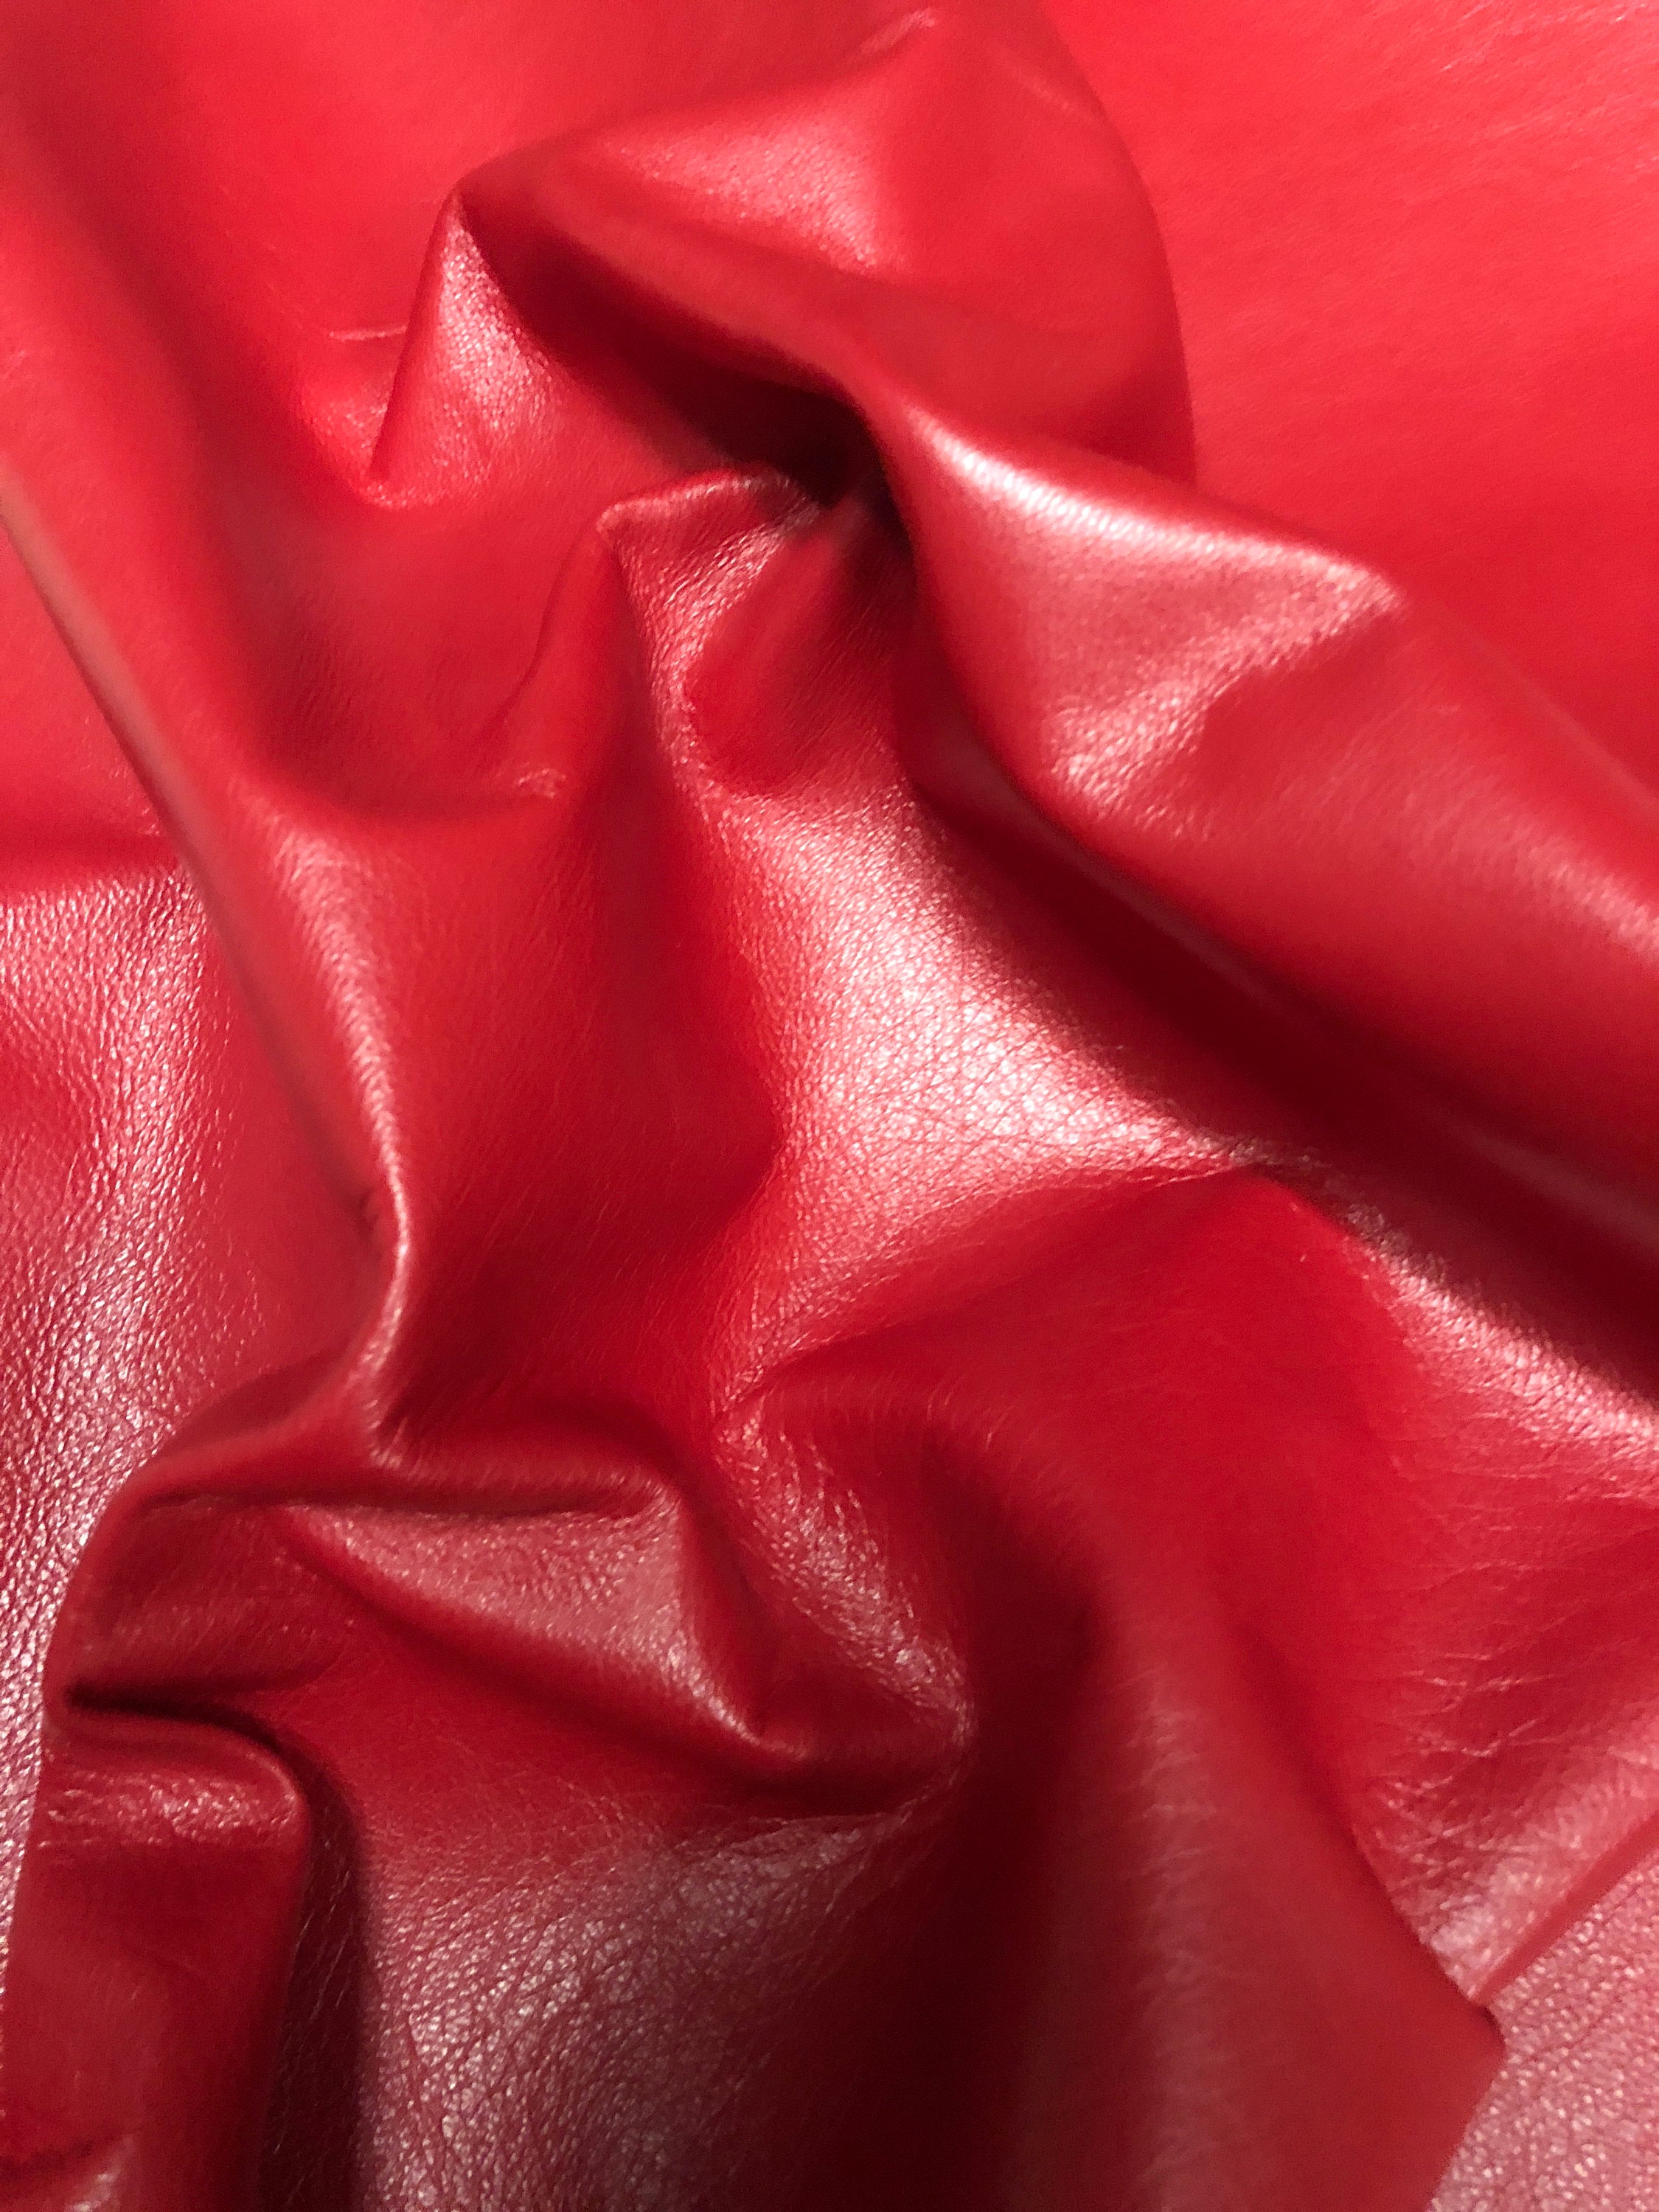 COLORED LEATHER SHEETS Choose Your Color Choose Your Size - Etsy